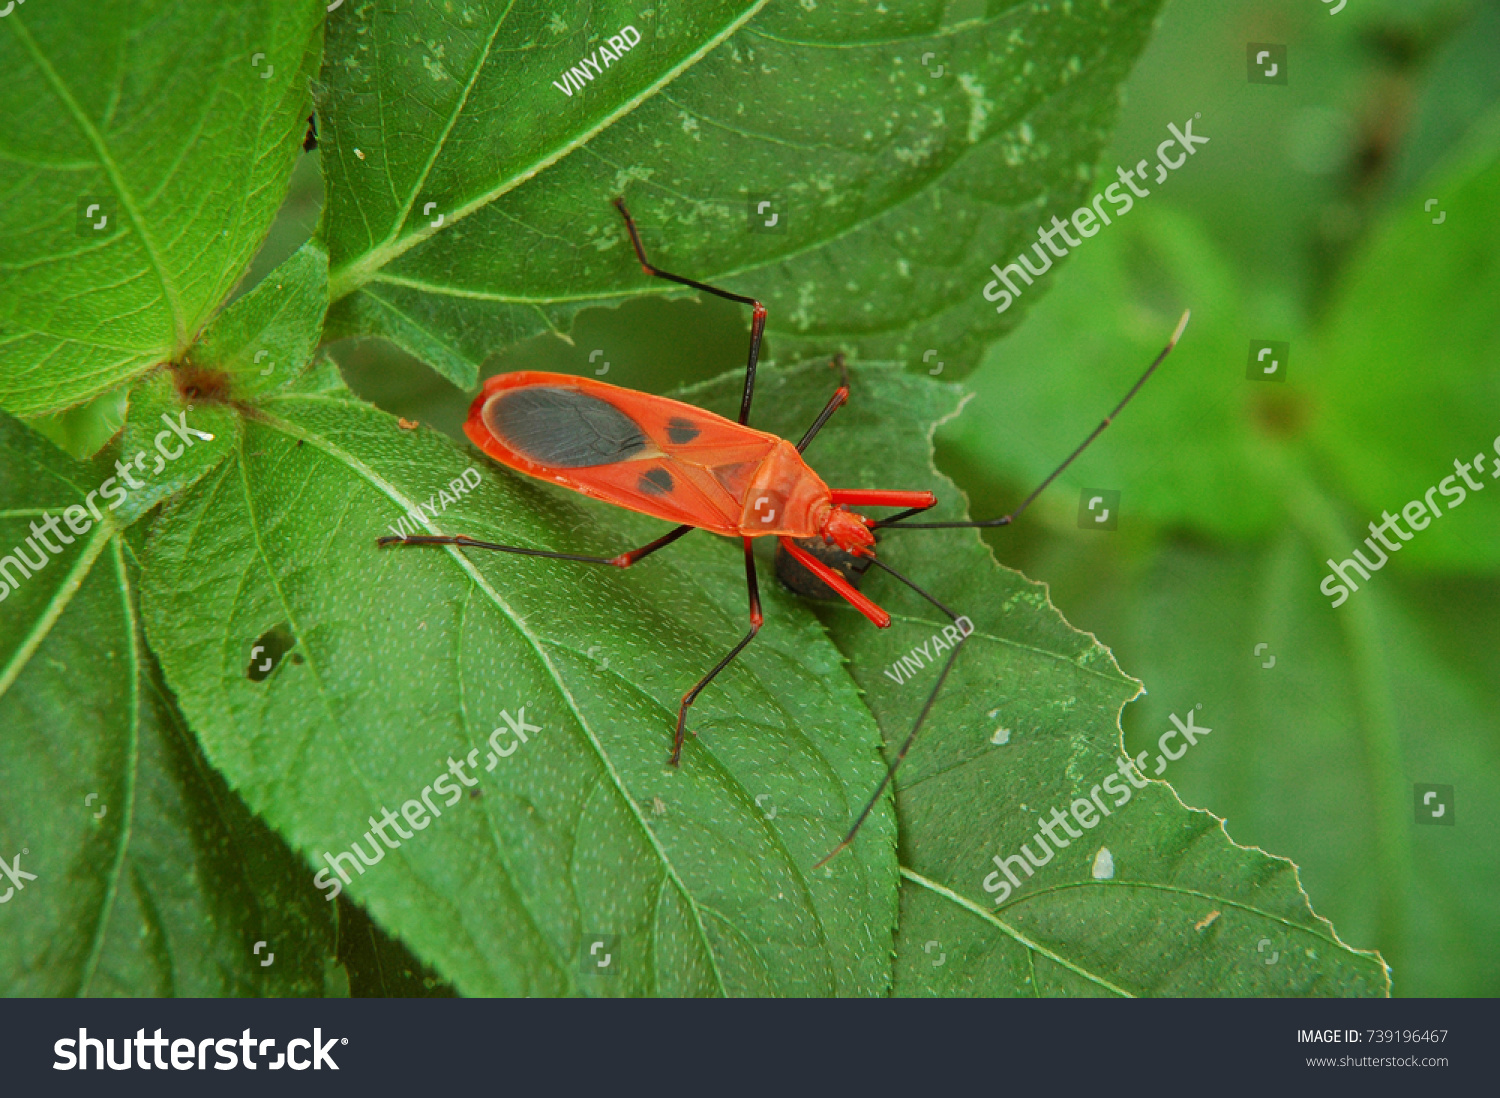 Red insect on leaves #739196467